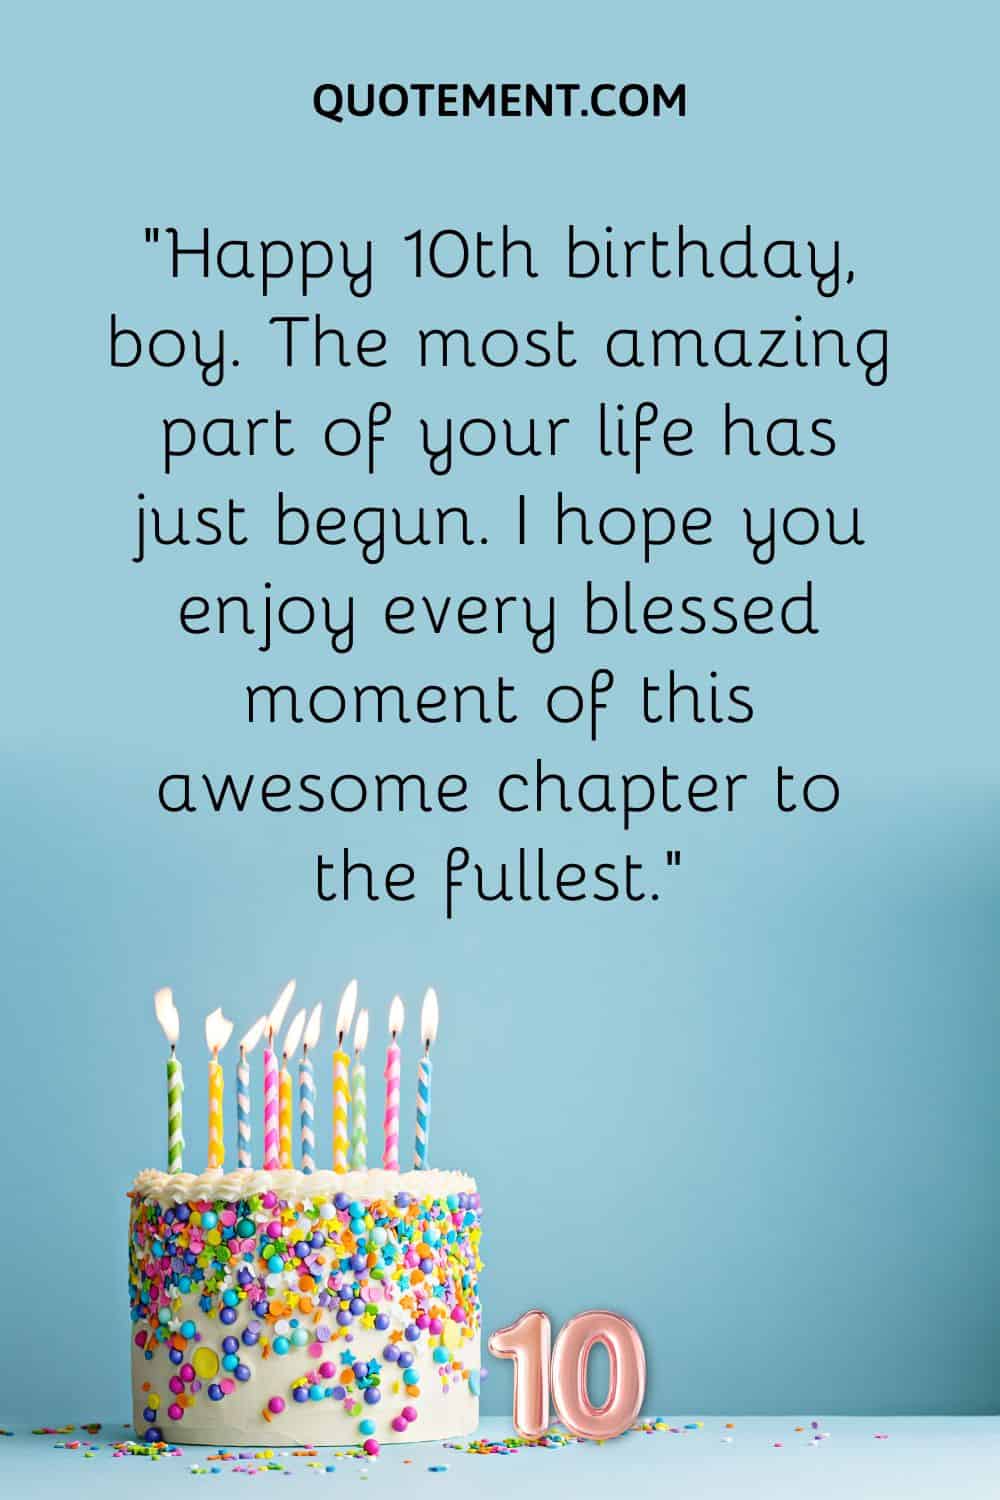 “Happy 10th birthday, boy. The most amazing part of your life has just begun. I hope you enjoy every blessed moment of this awesome chapter to the fullest.”